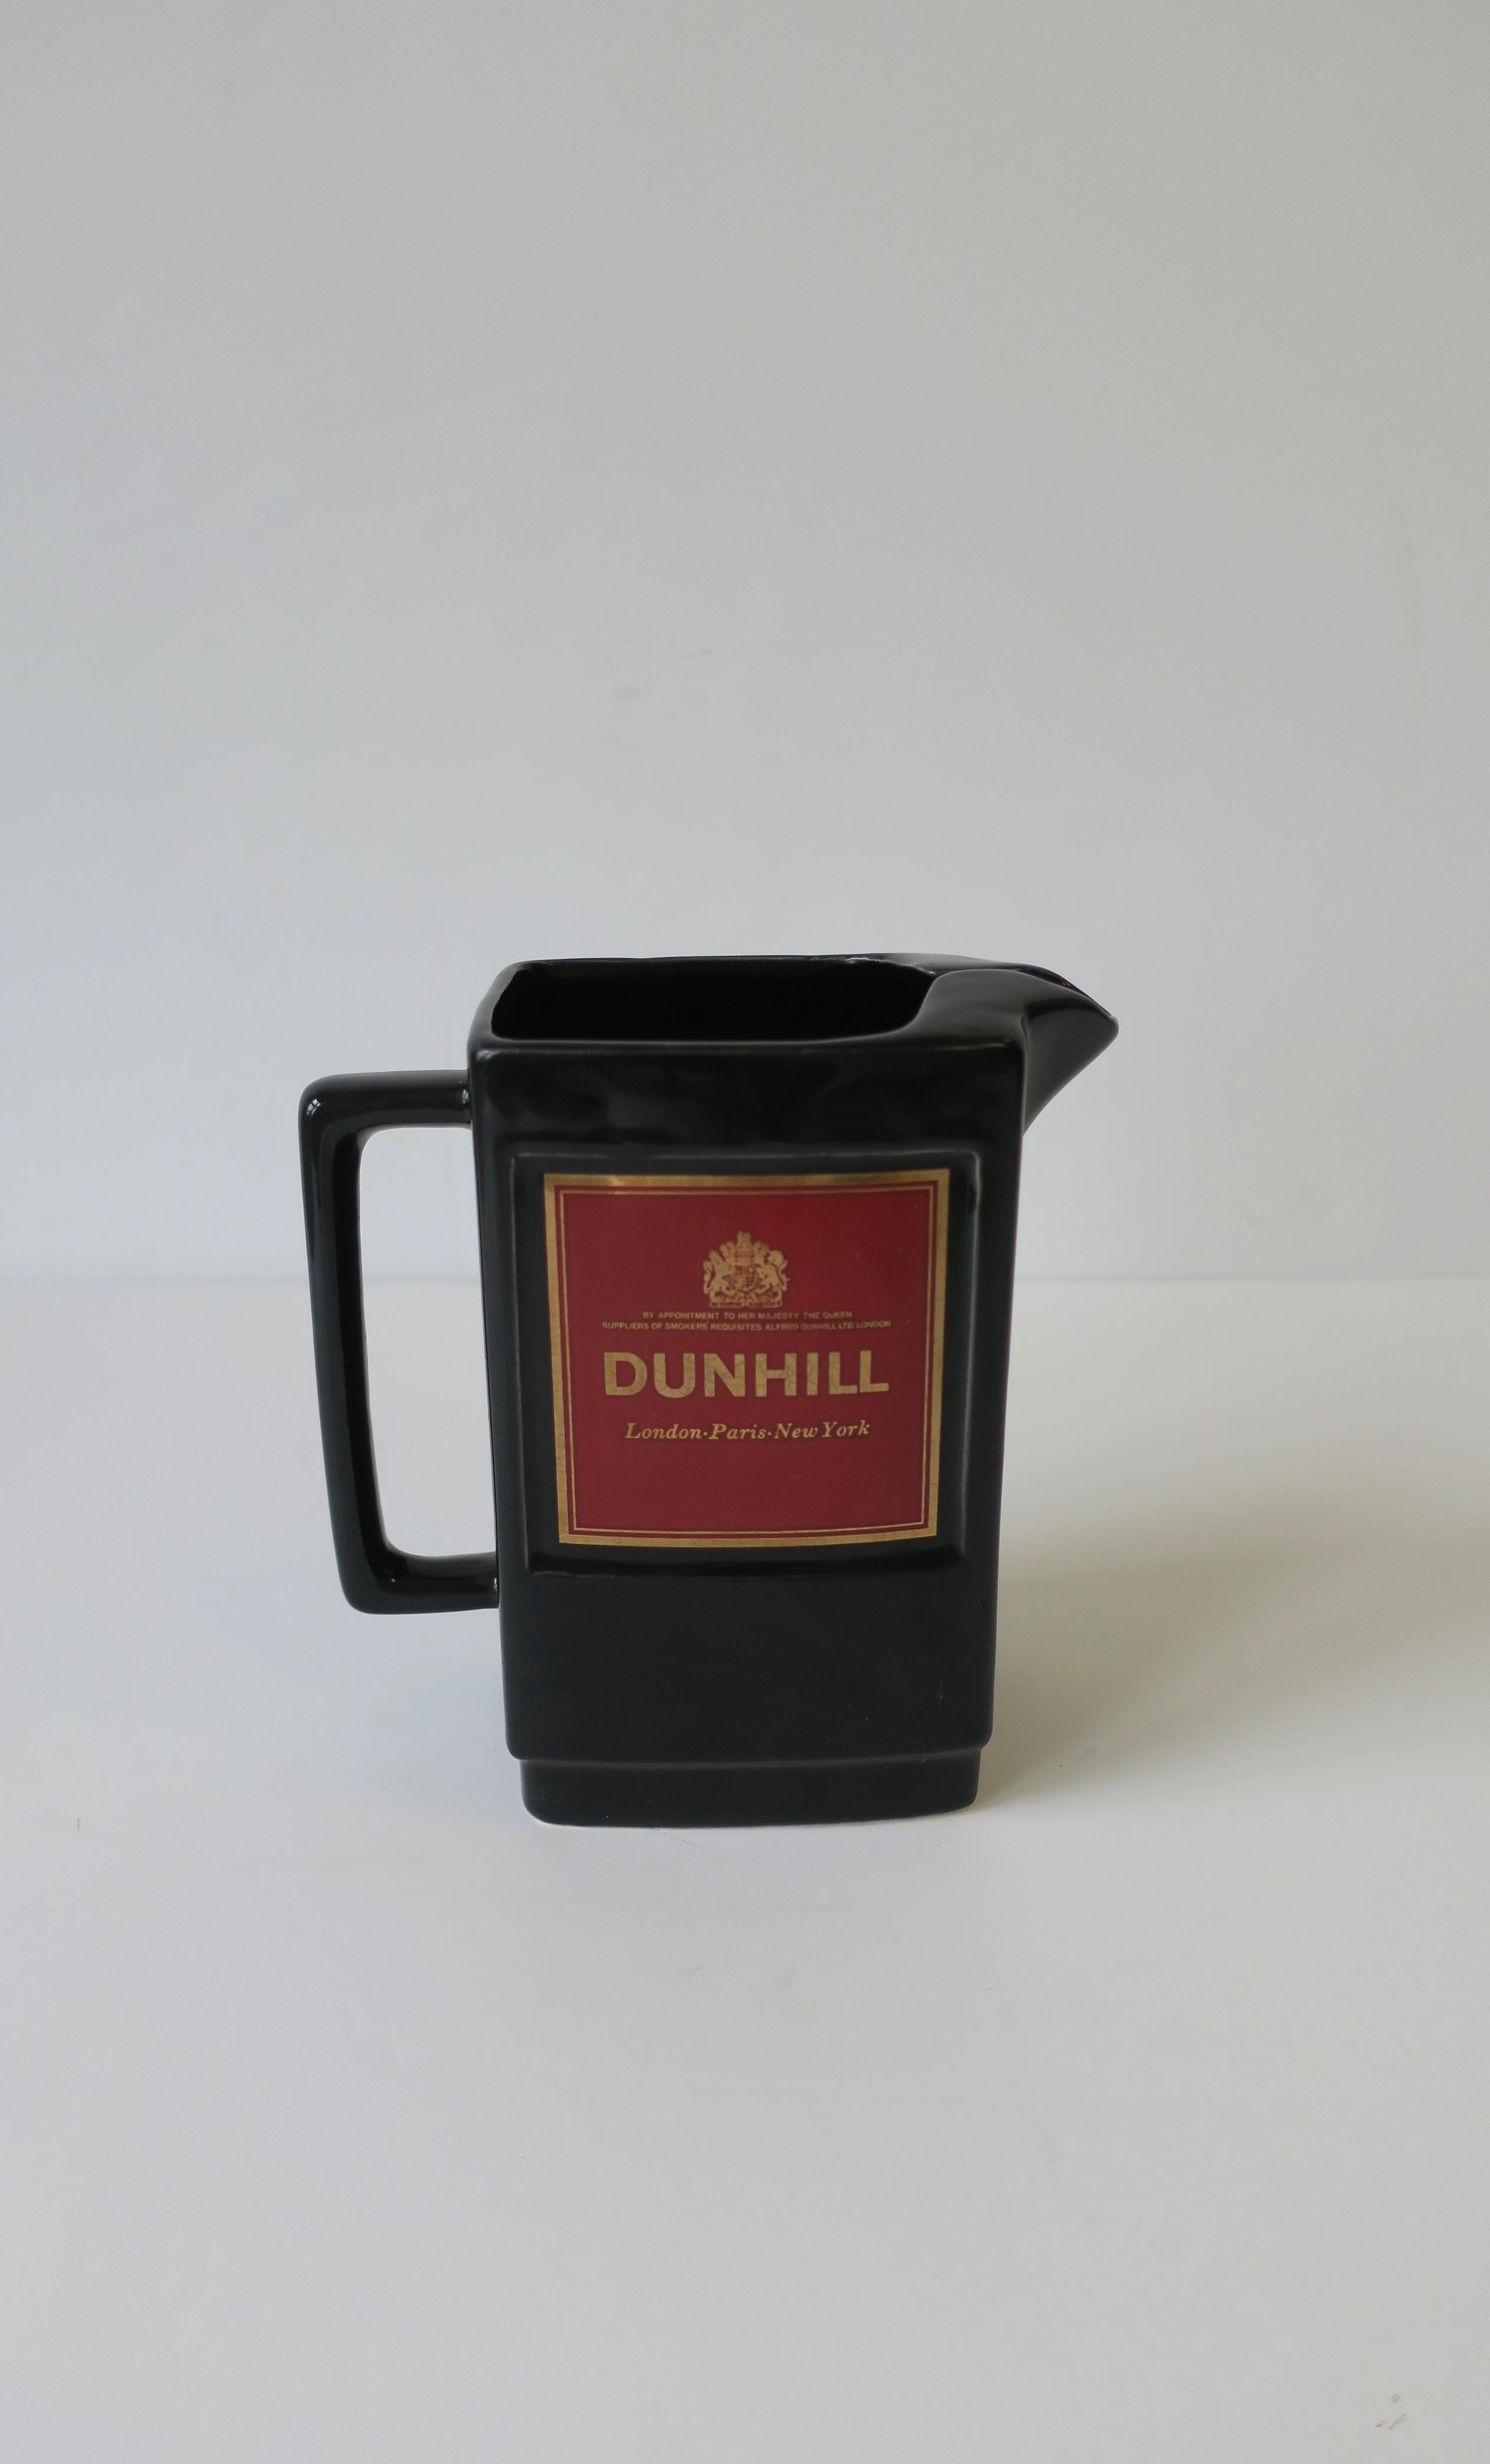 A great black, gold, and burgundy red liquor, spirits, or water decanter pitcher from iconic luxury retailer Dunhill, circa mid-20th century, England. Reads on front 